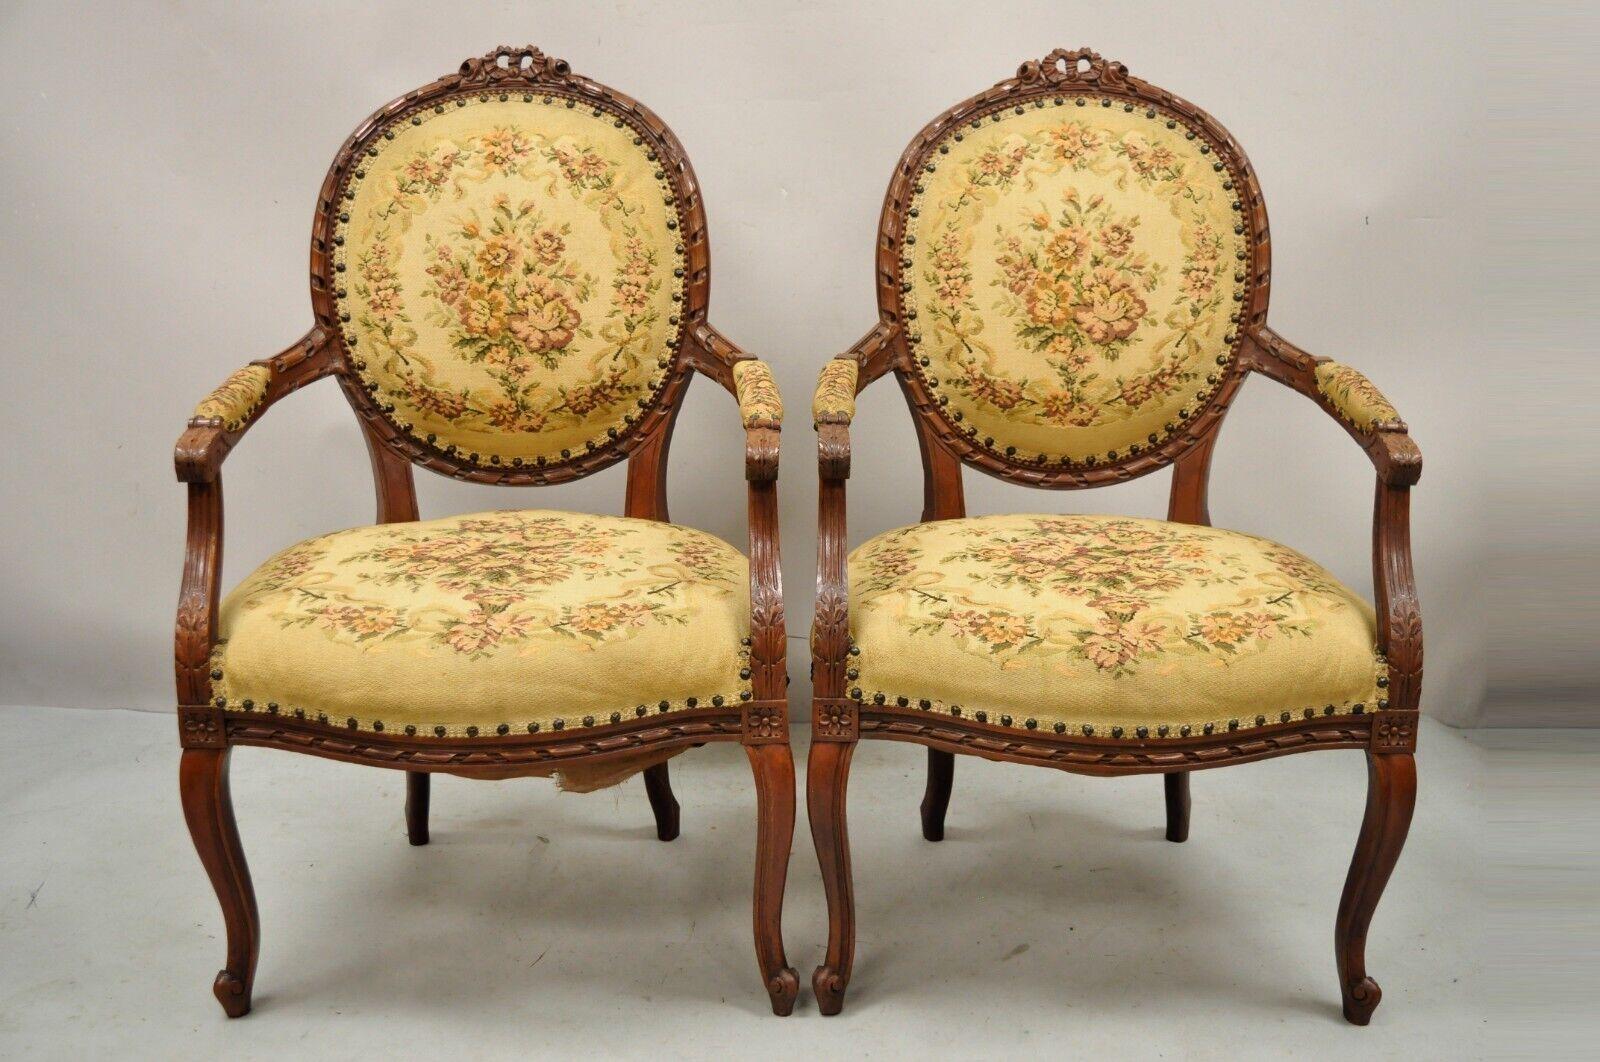 Antique French Country Louis XV Victorian Style Floral Tapestry arm chairs - a Pair. Item features a ribbon and rose carved crest, floral tapestry upholstery, solid wood frames, upholstered armrests, cabriole legs, very nice vintage pair. Circa